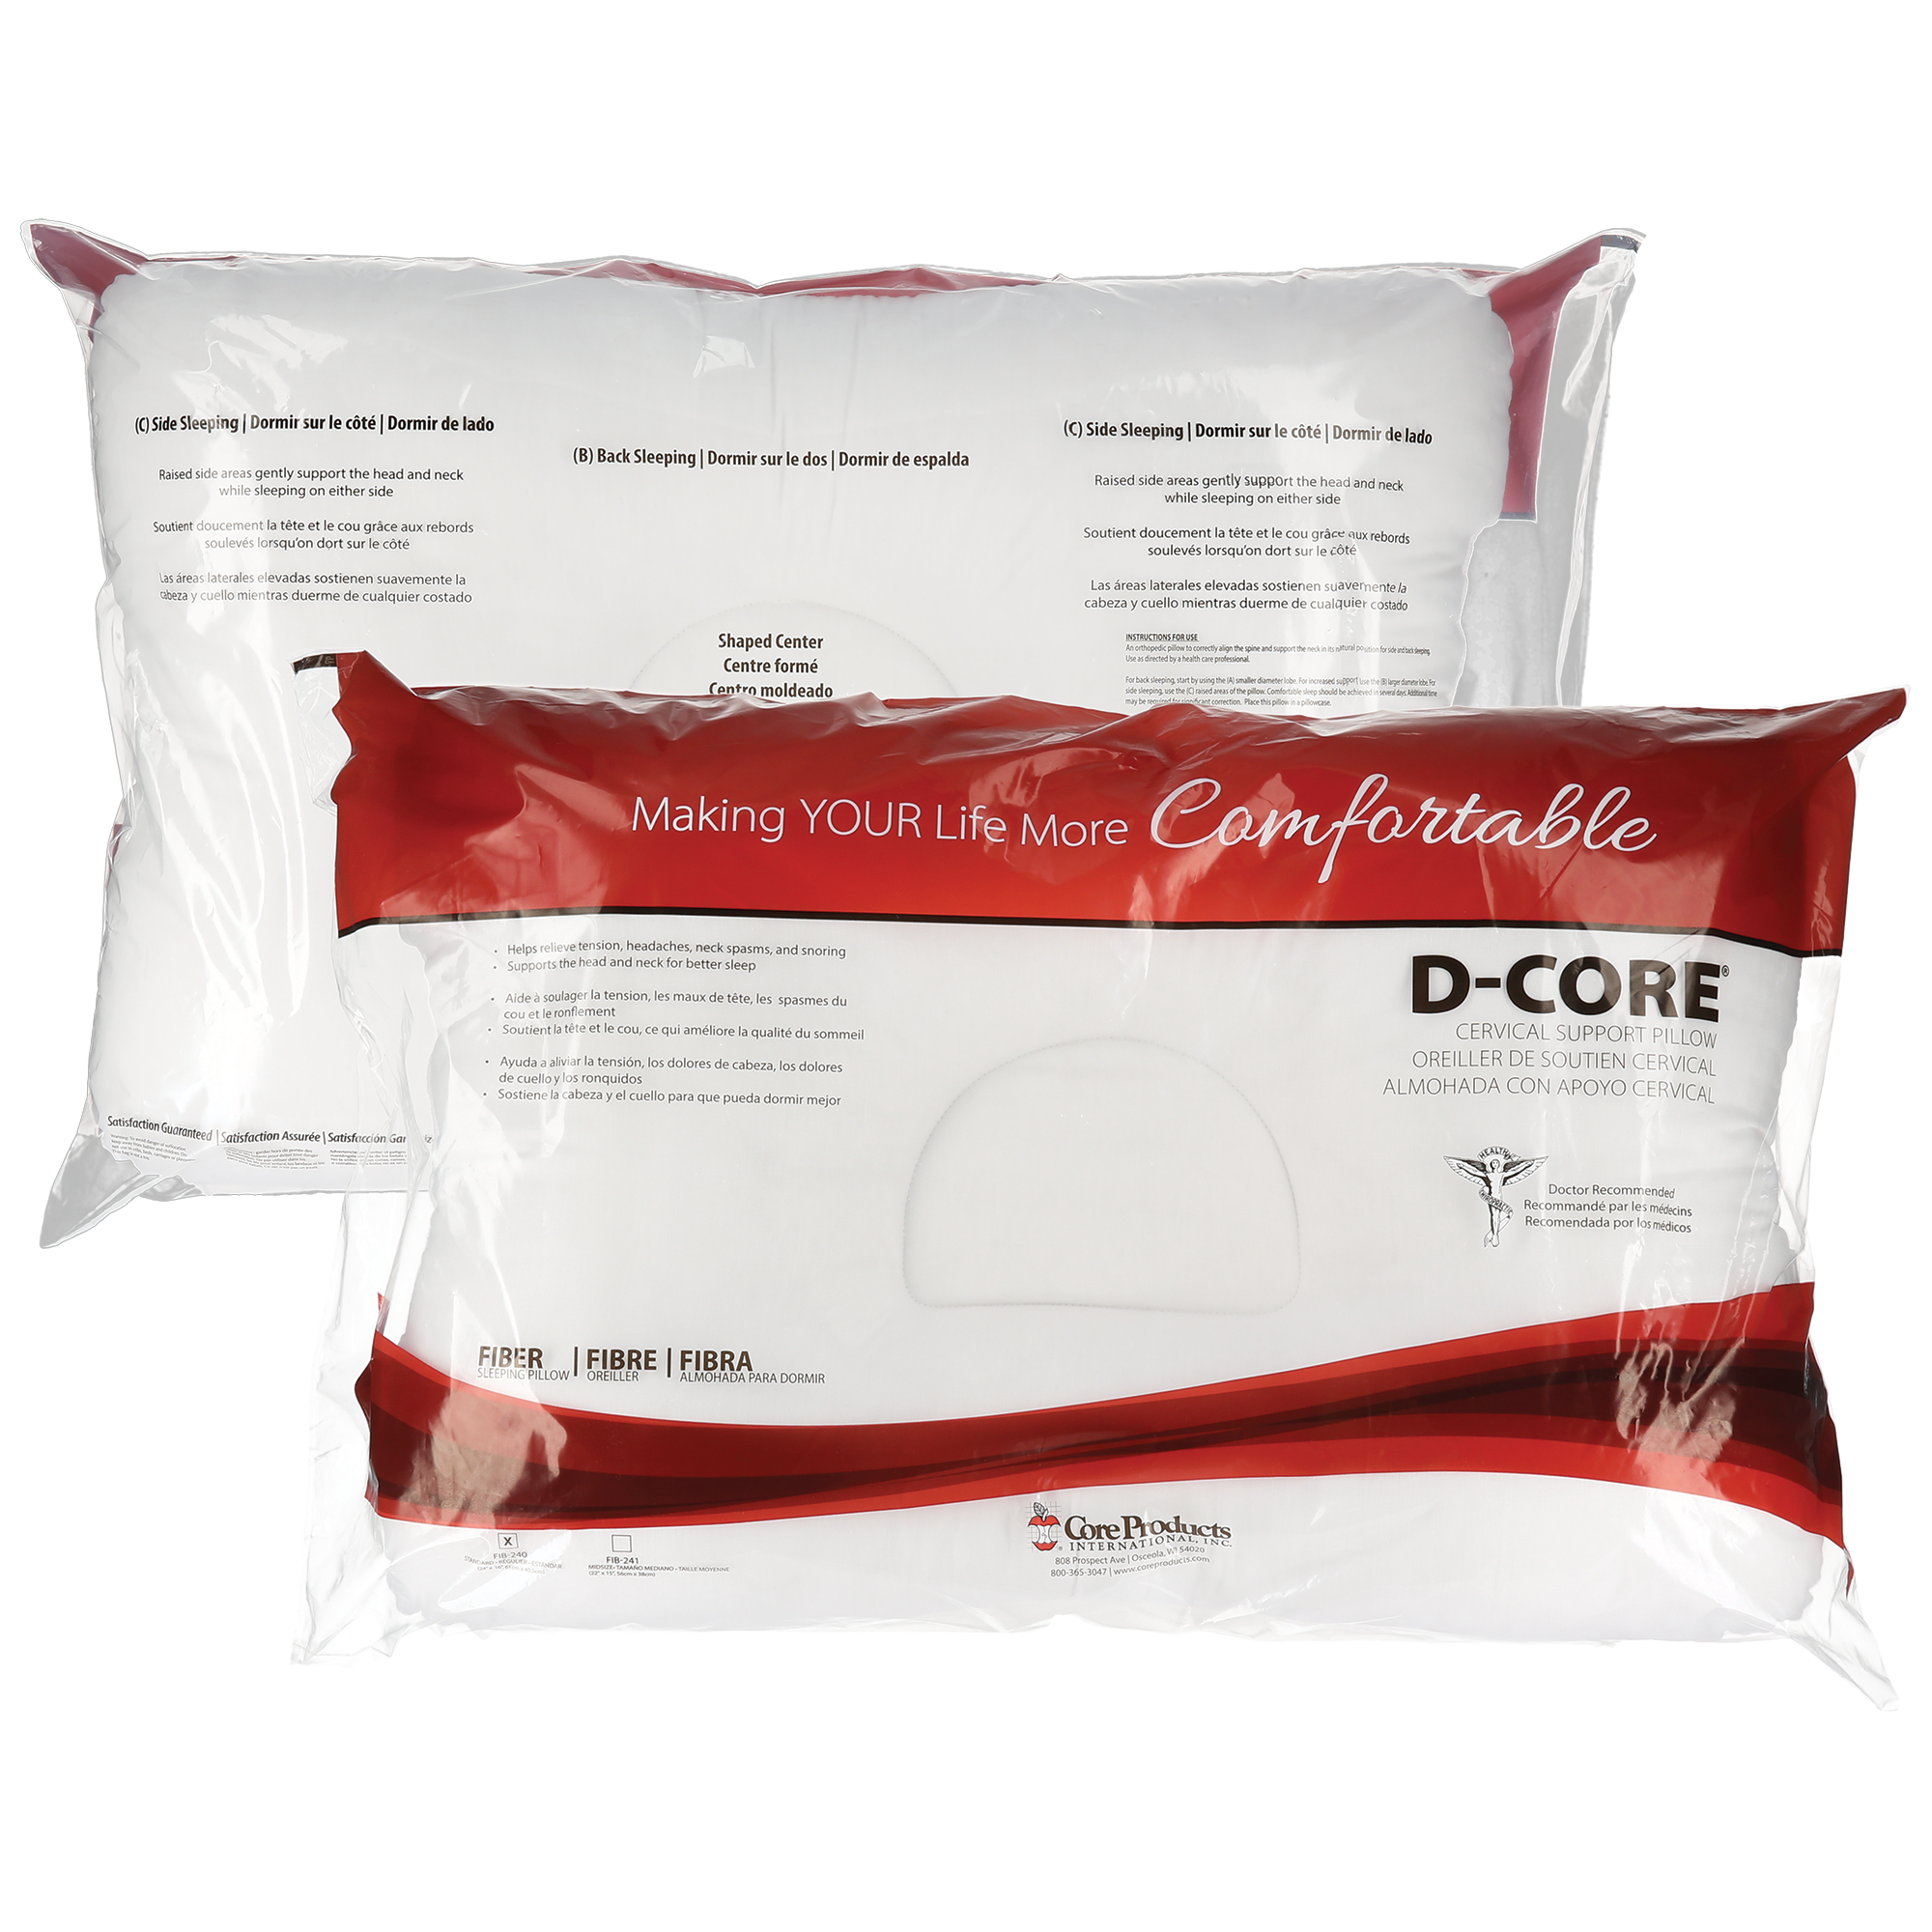 D-Core cervical support pillow packaging by Core Products